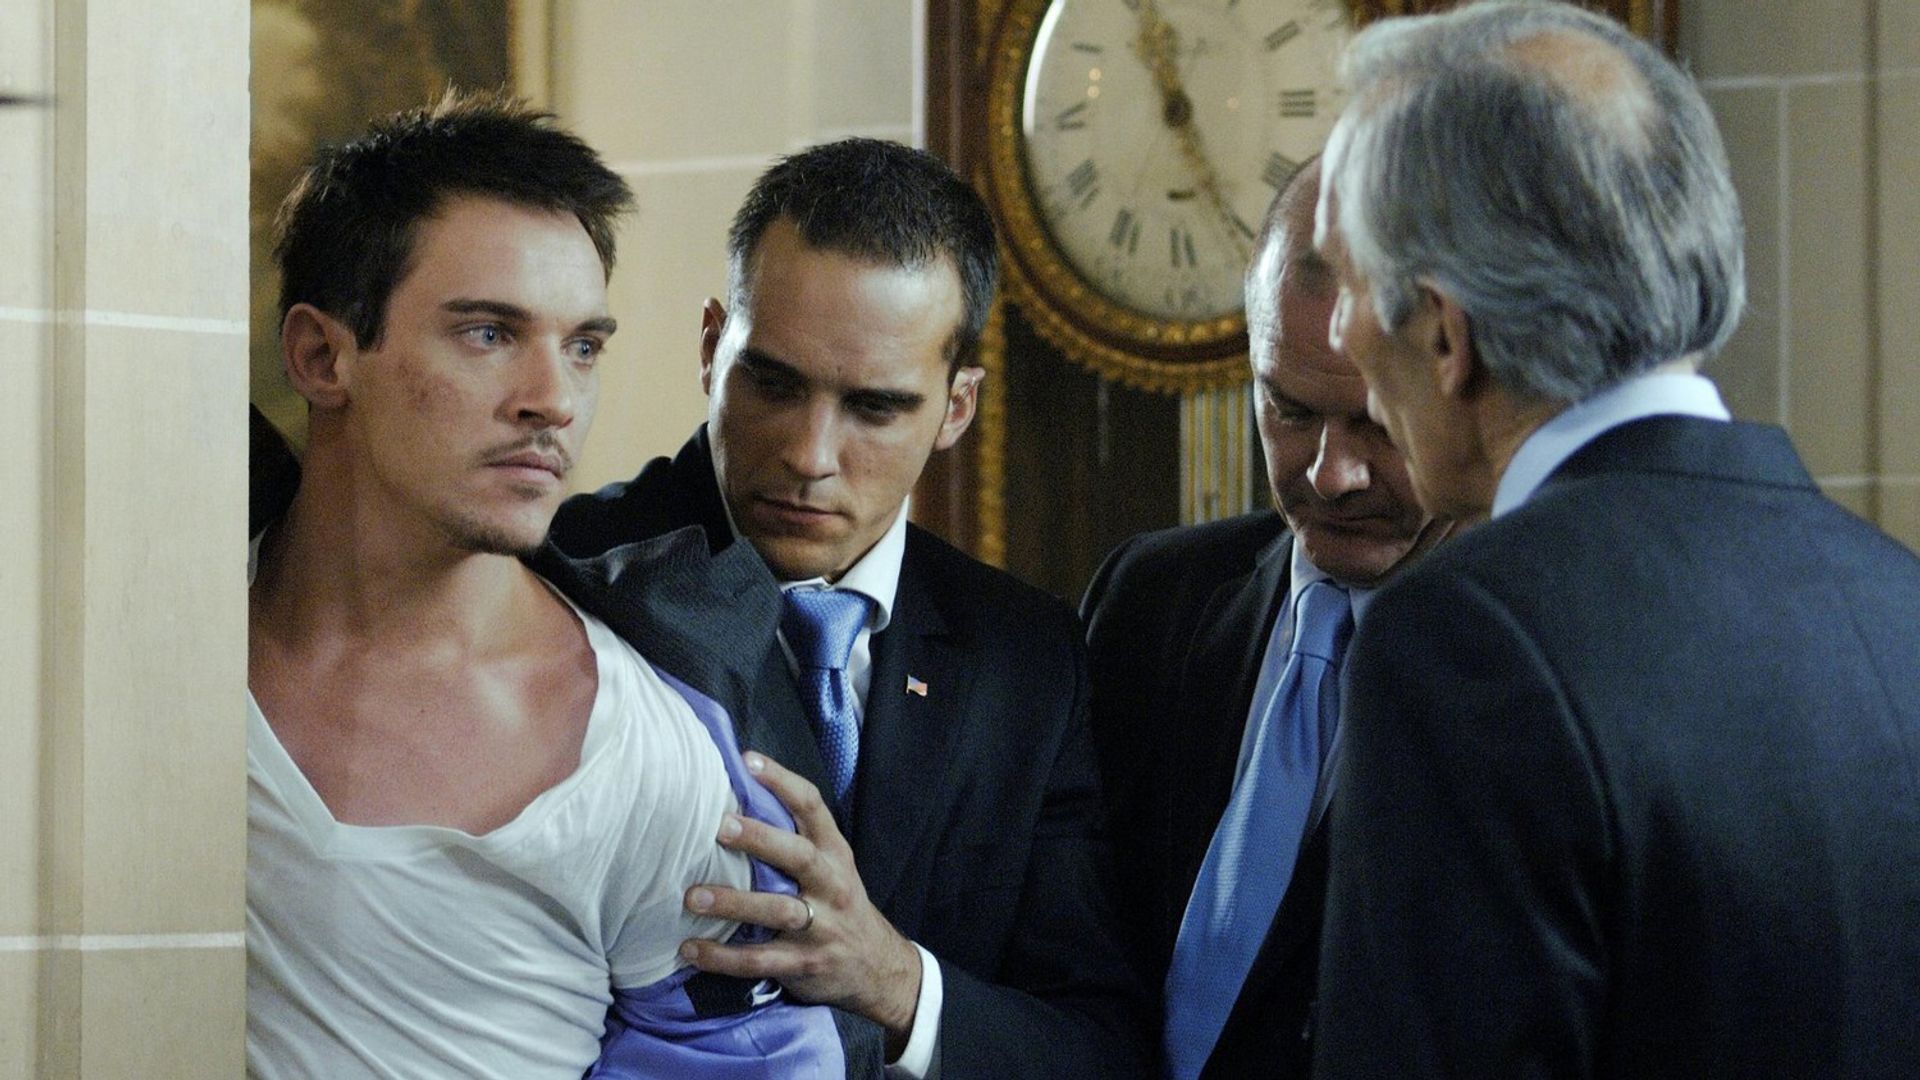 Jonathan Rhys Meyers in the film From Paris with Love